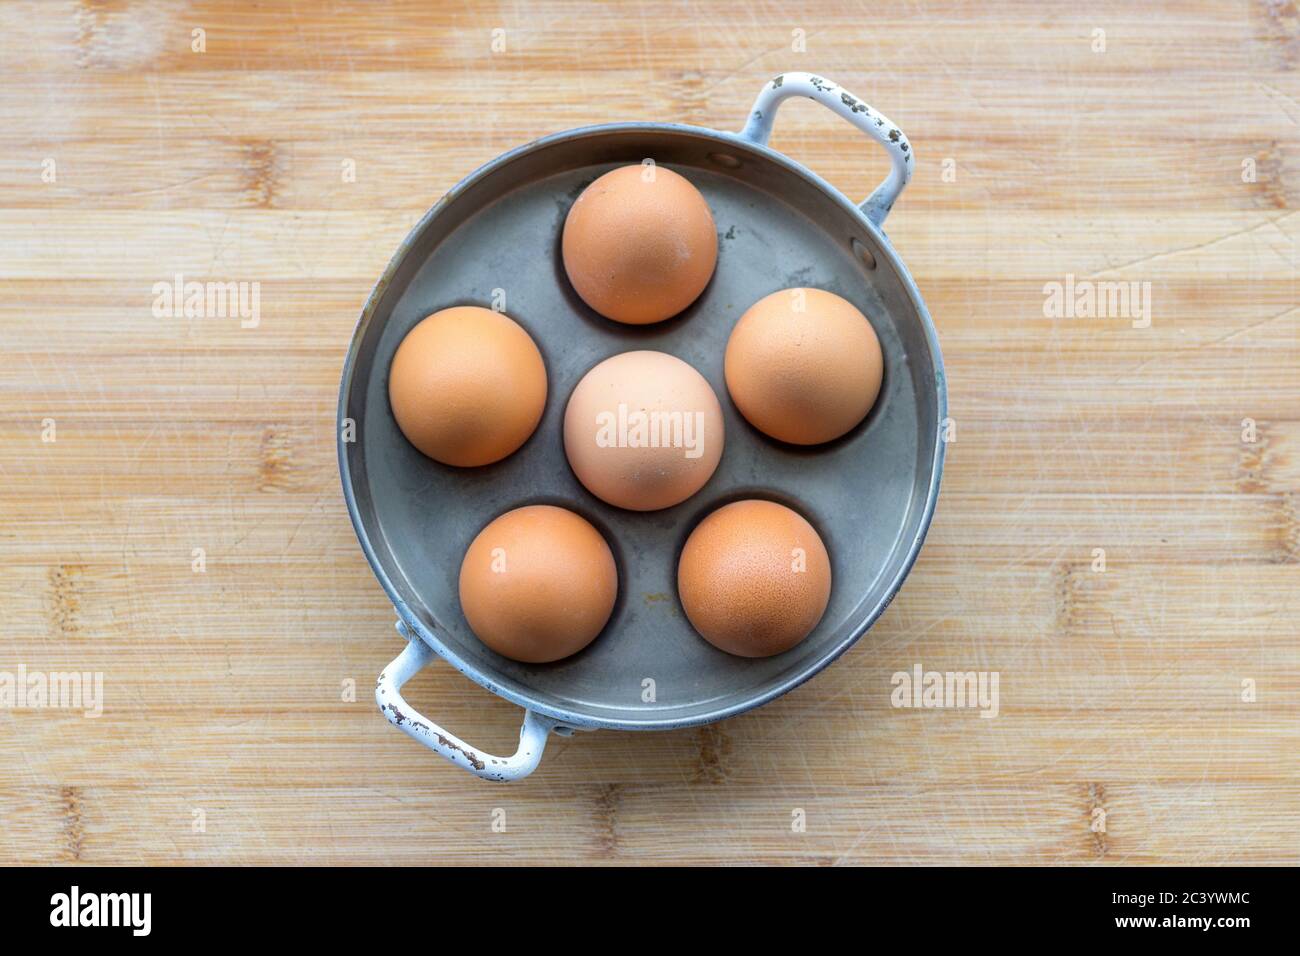 Six fresh brown hens eggs in a metal pot or egg coddler viewed from overhead on a wooden table with copyspace placed in the centre Stock Photo